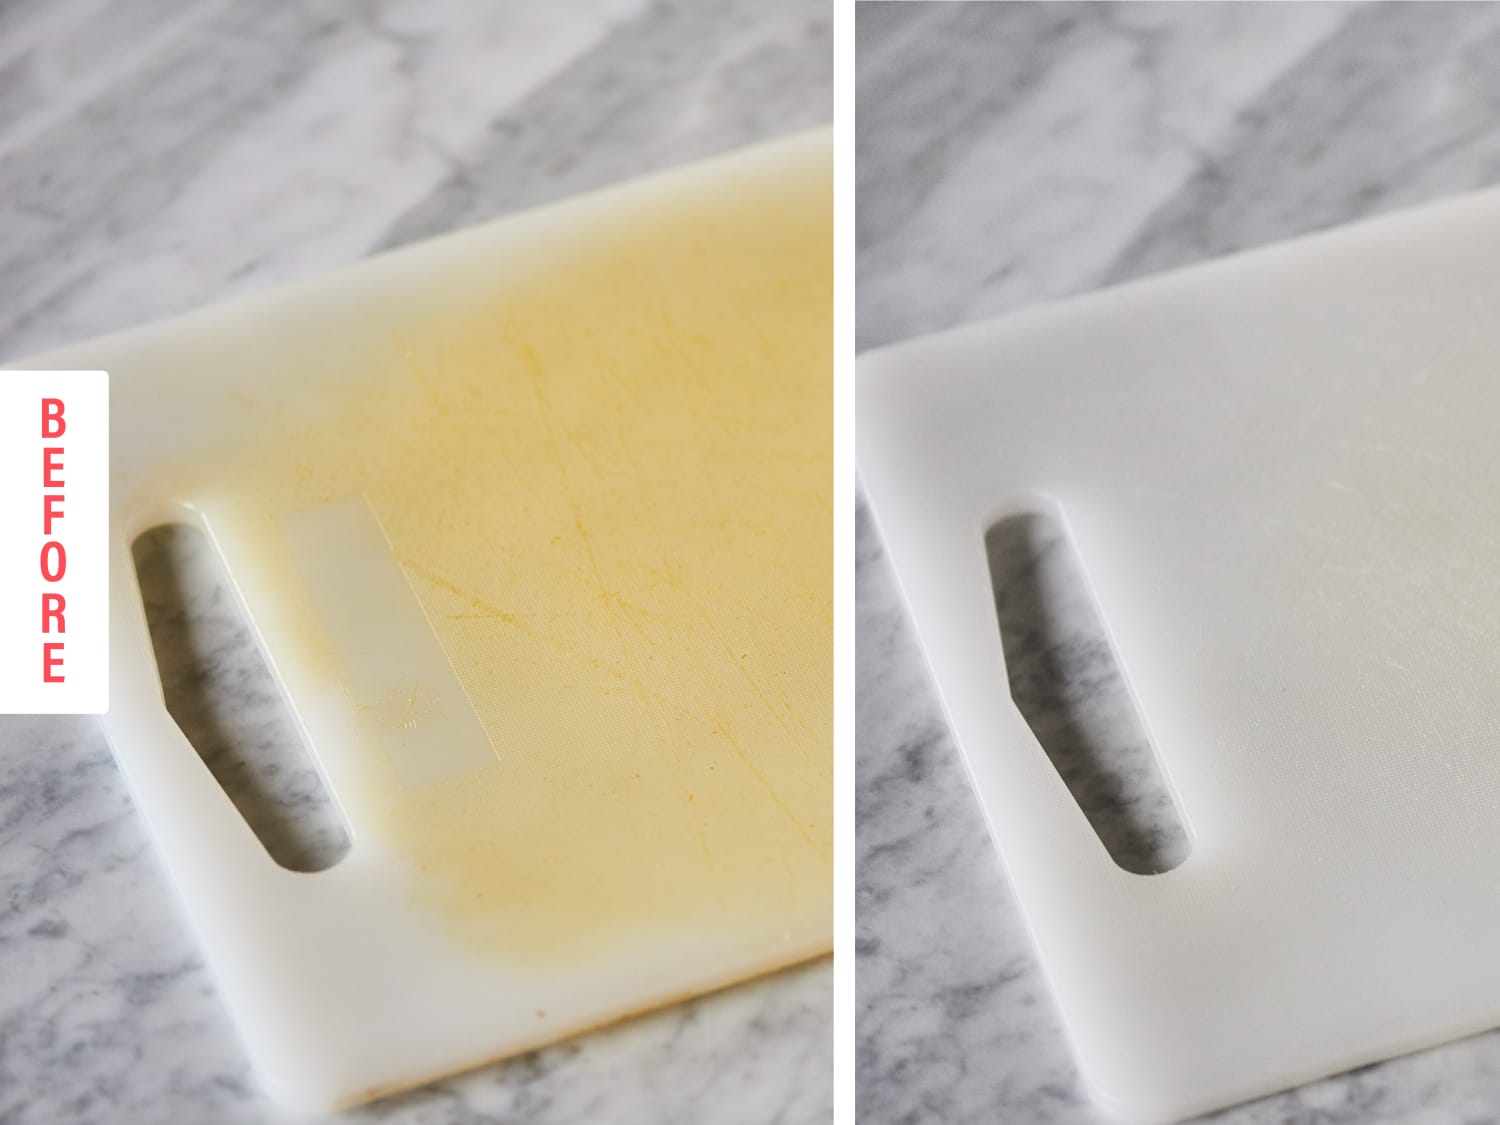 The Best Method for Cleaning Plastic Cutting Boards